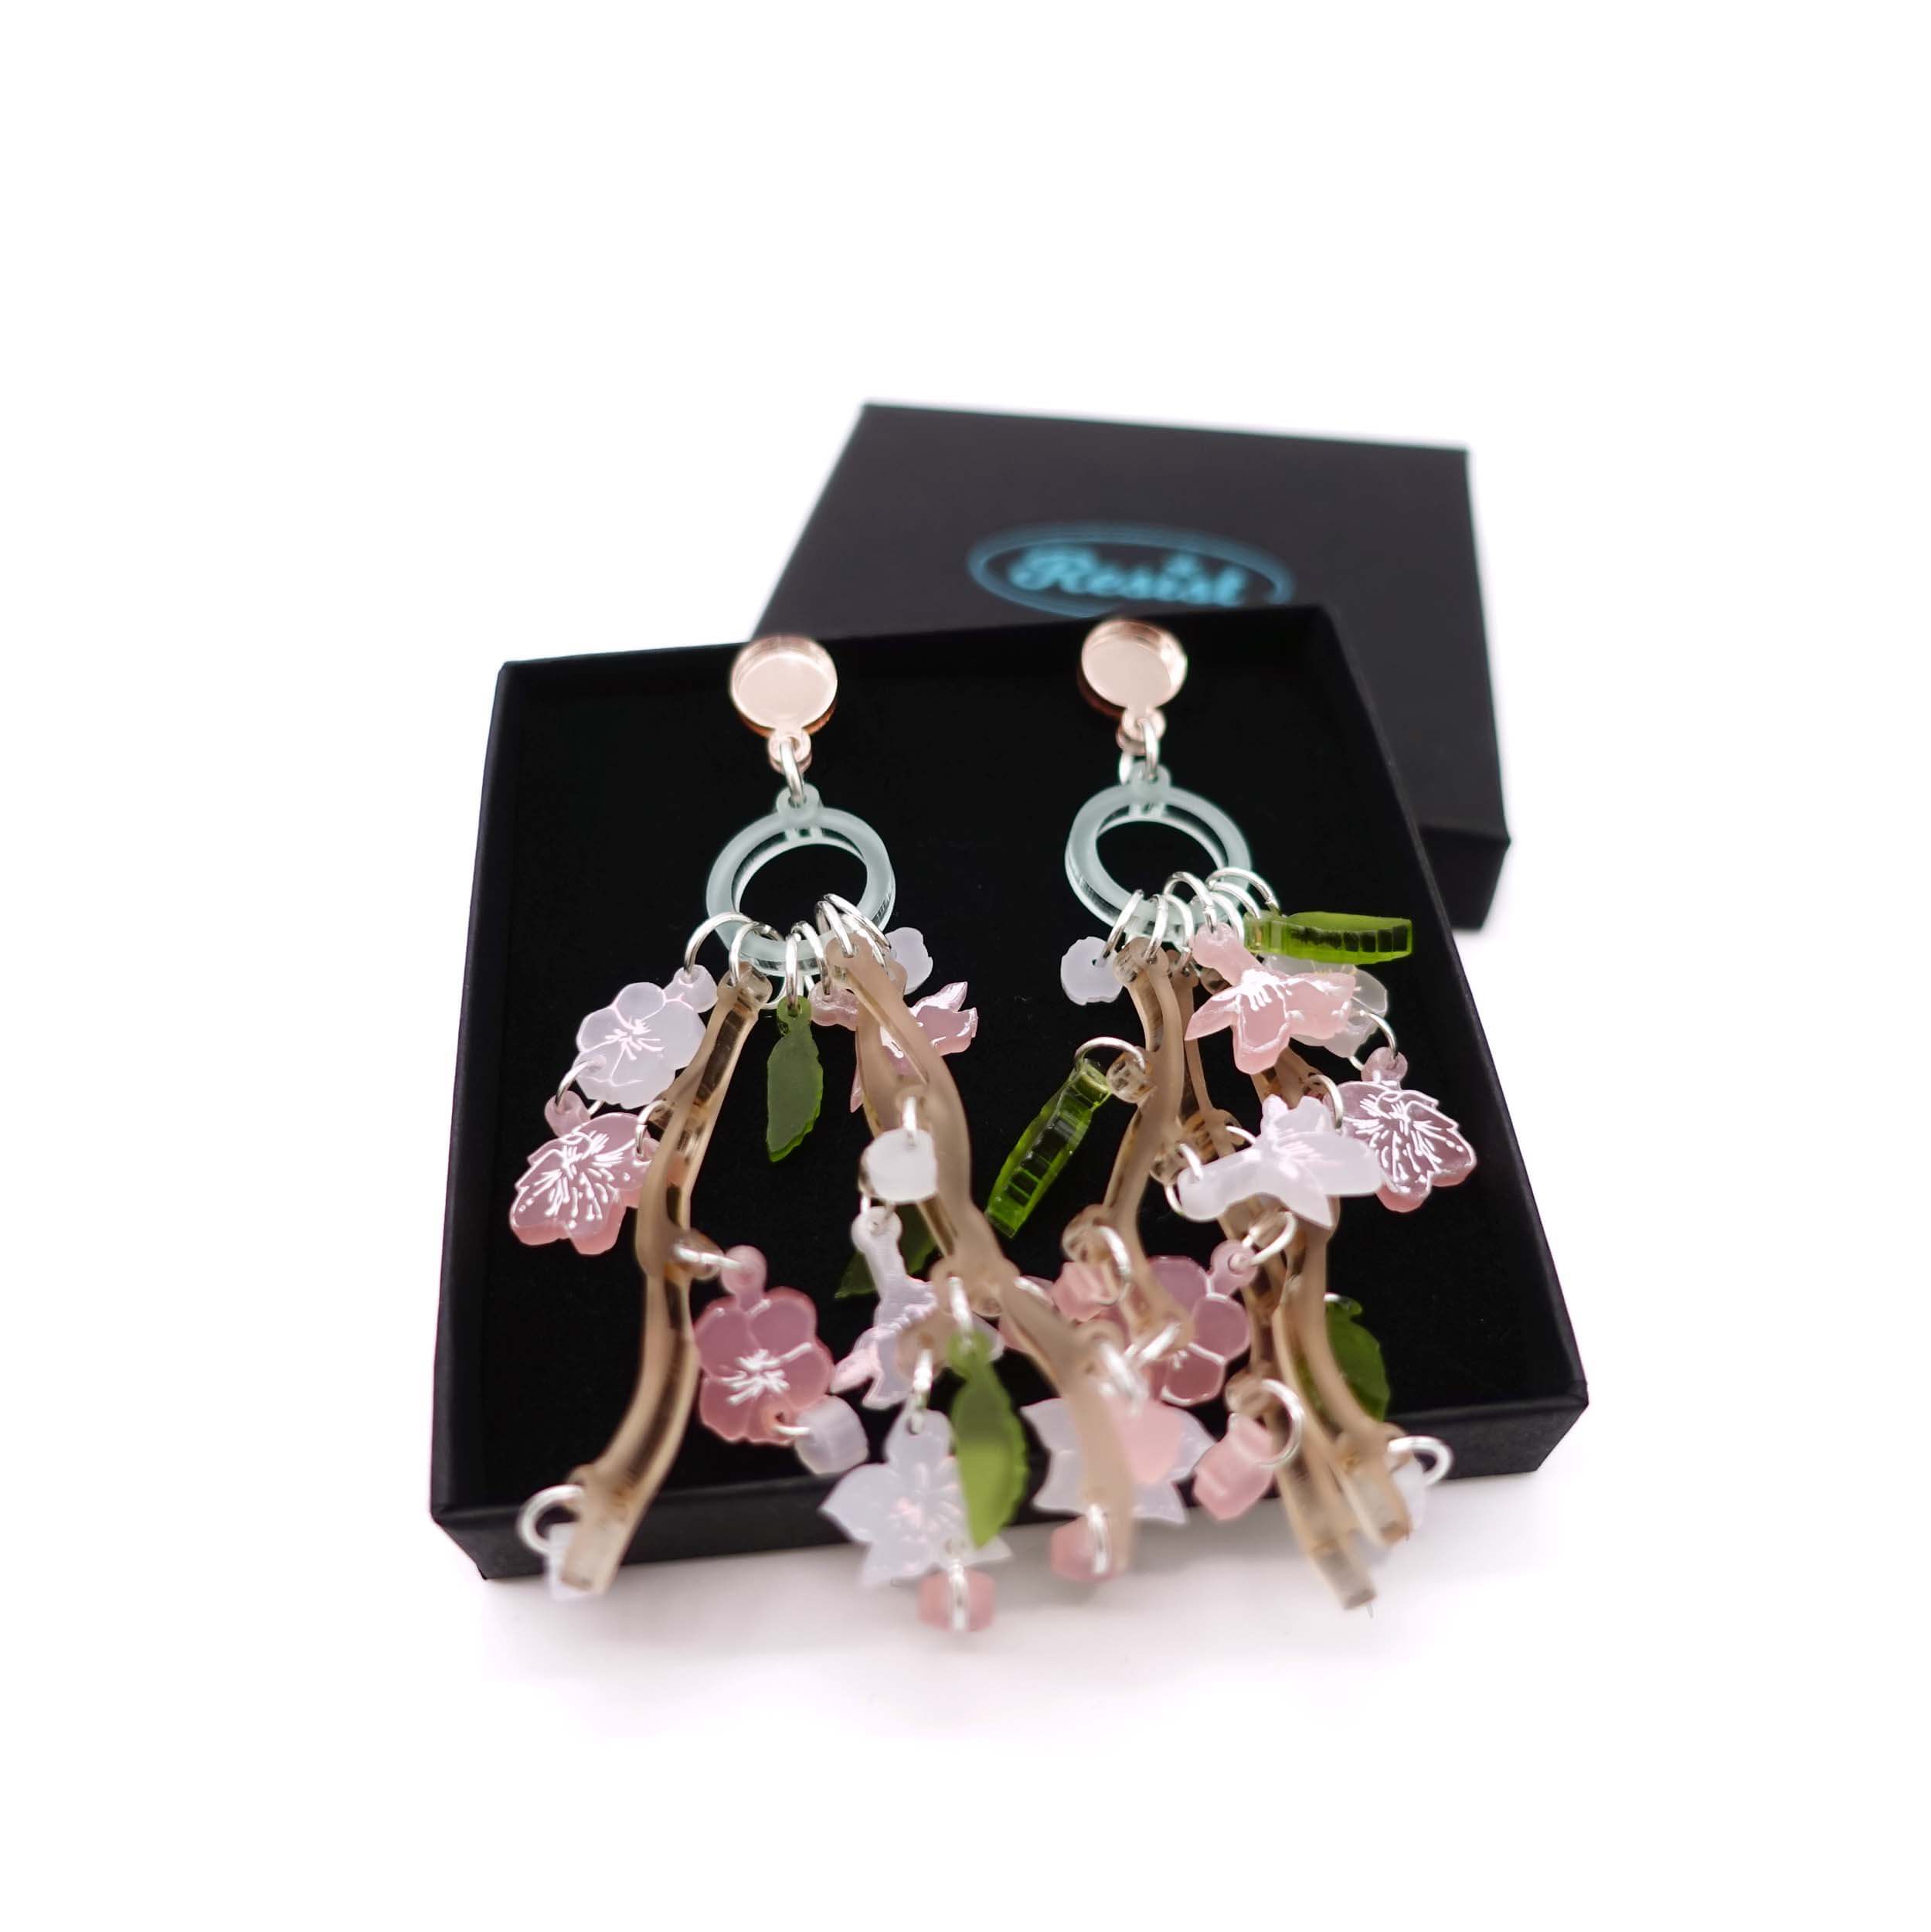 Limited edition cherry blossom earrings designed by Sarah Day shown in a Wear and Resist gift box. 